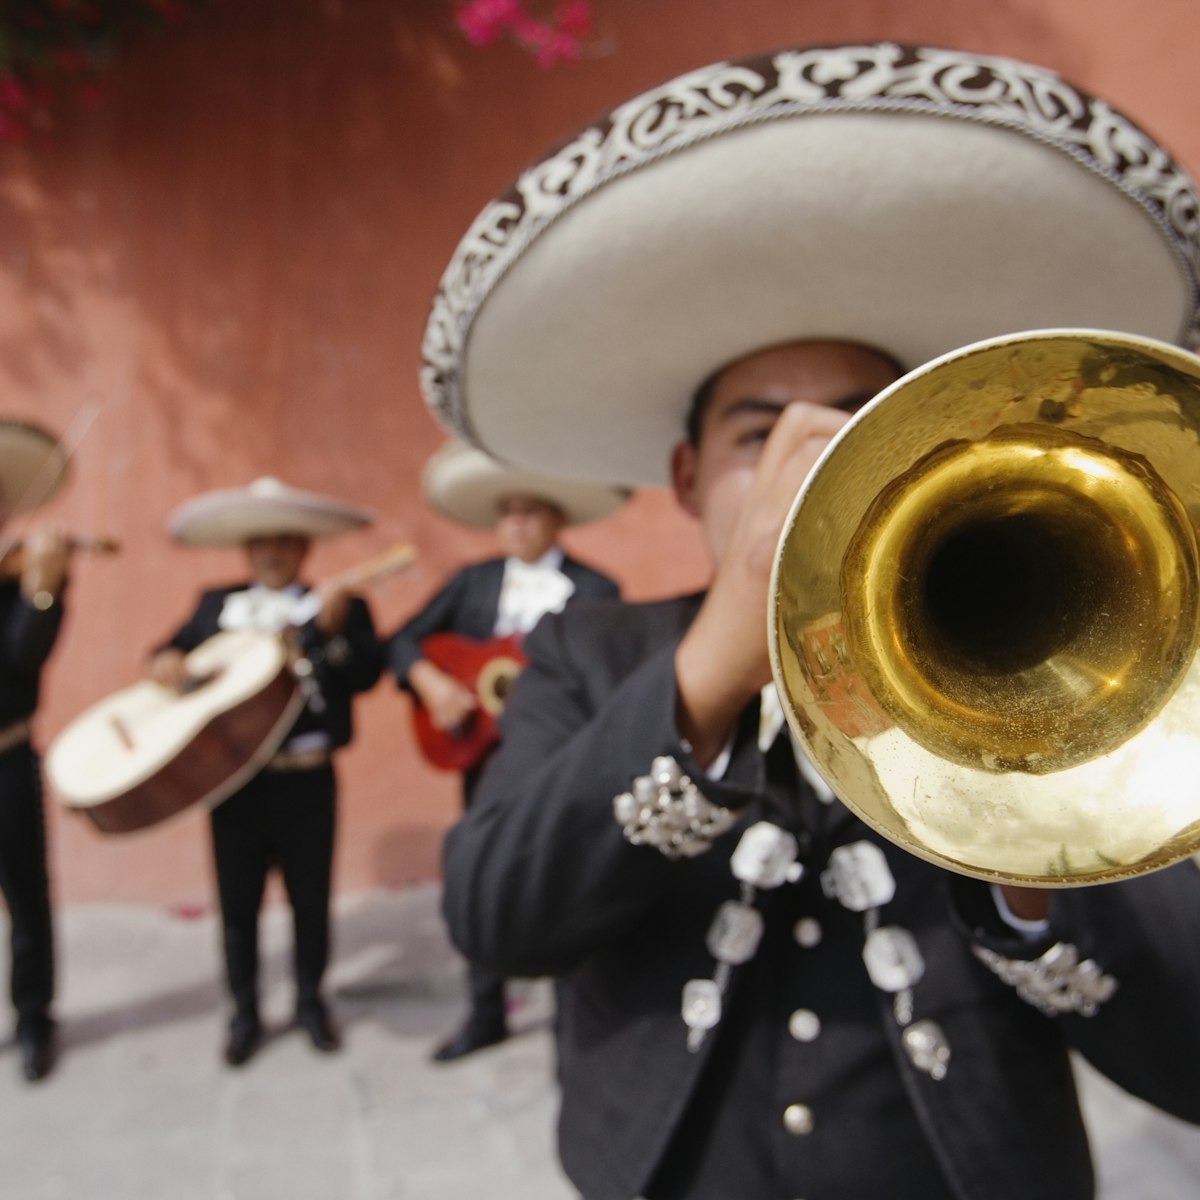 500px Photo ID: 90987349 - Trumpet player in Mariachi band